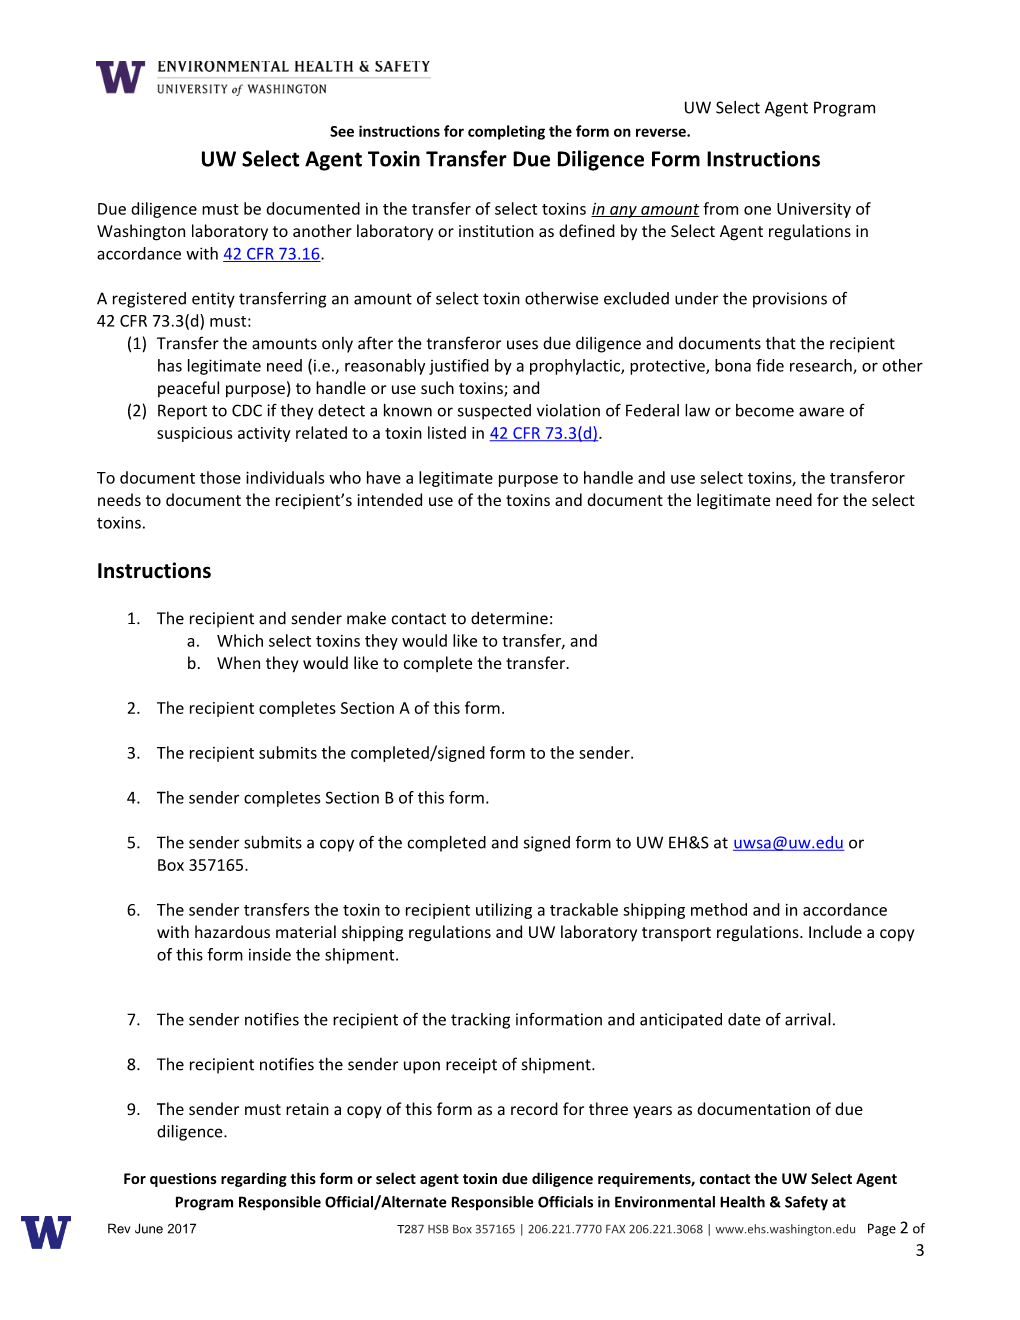 Select Agent Toxin Transfer Due Diligence Form